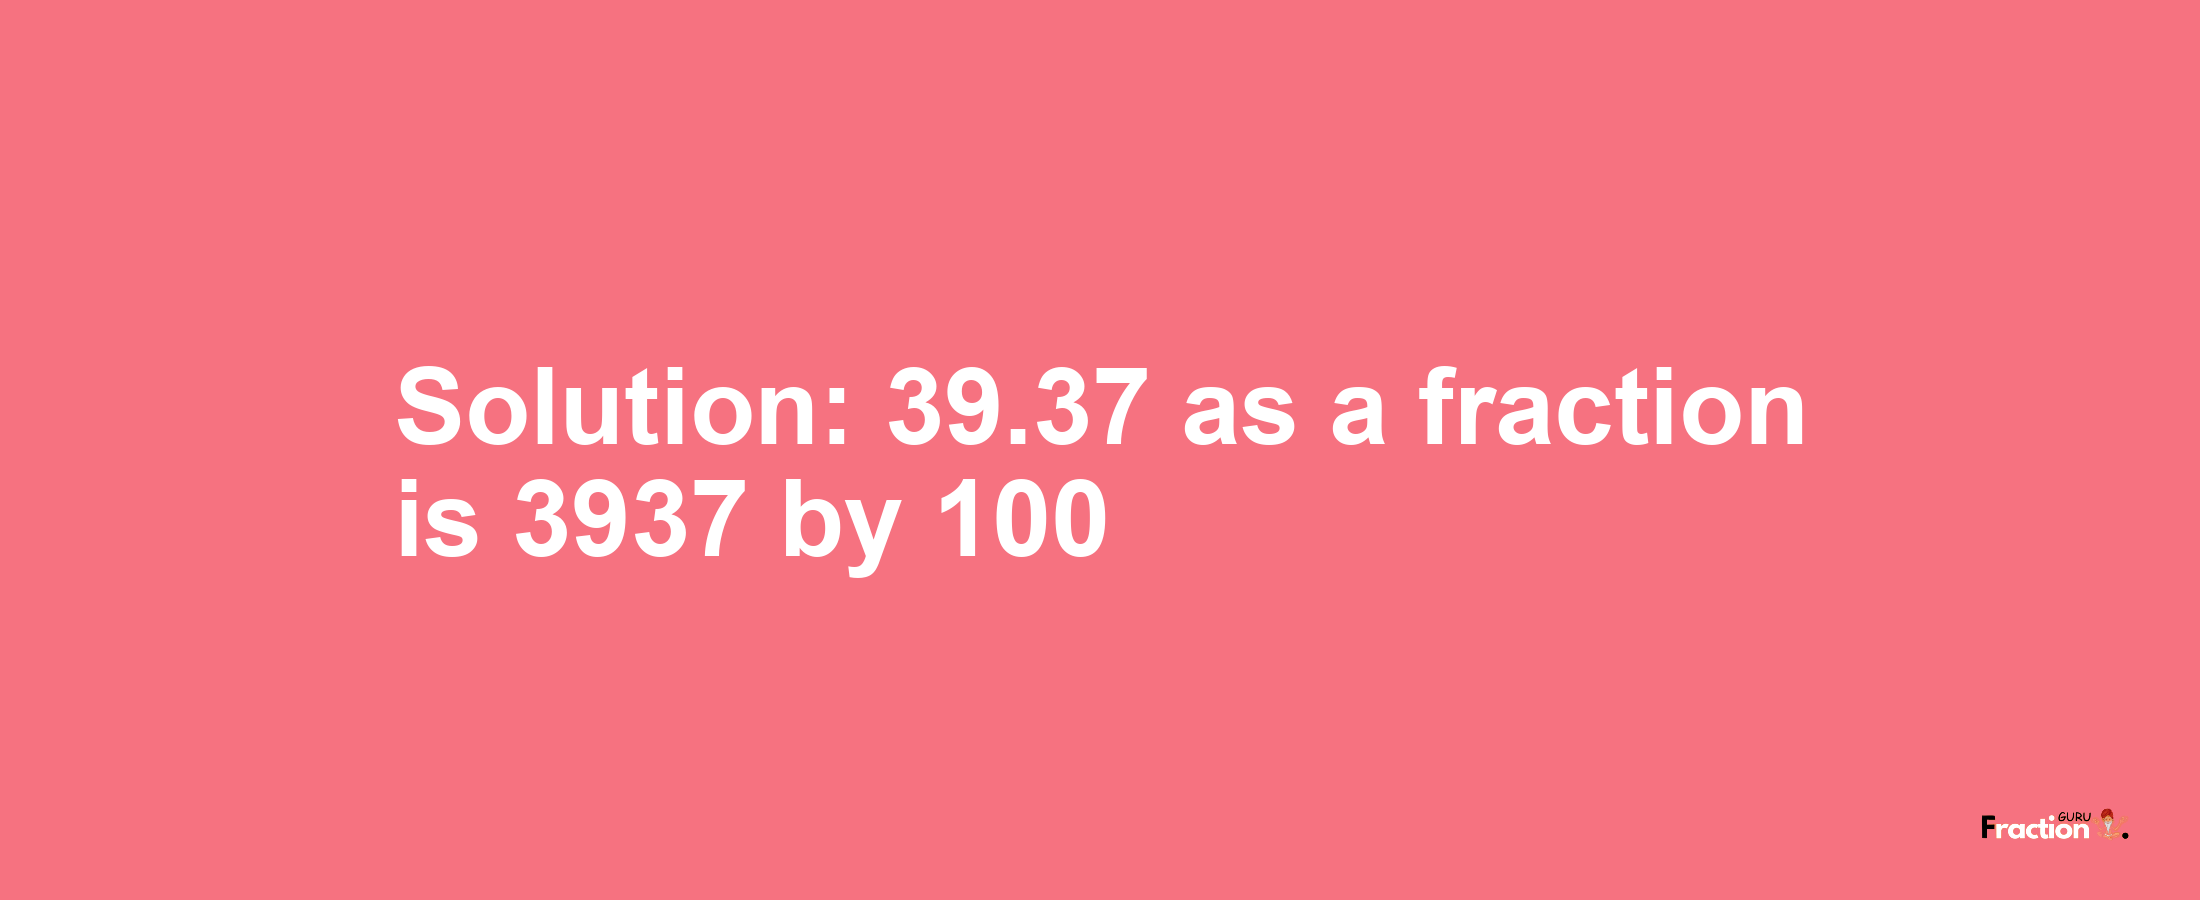 Solution:39.37 as a fraction is 3937/100